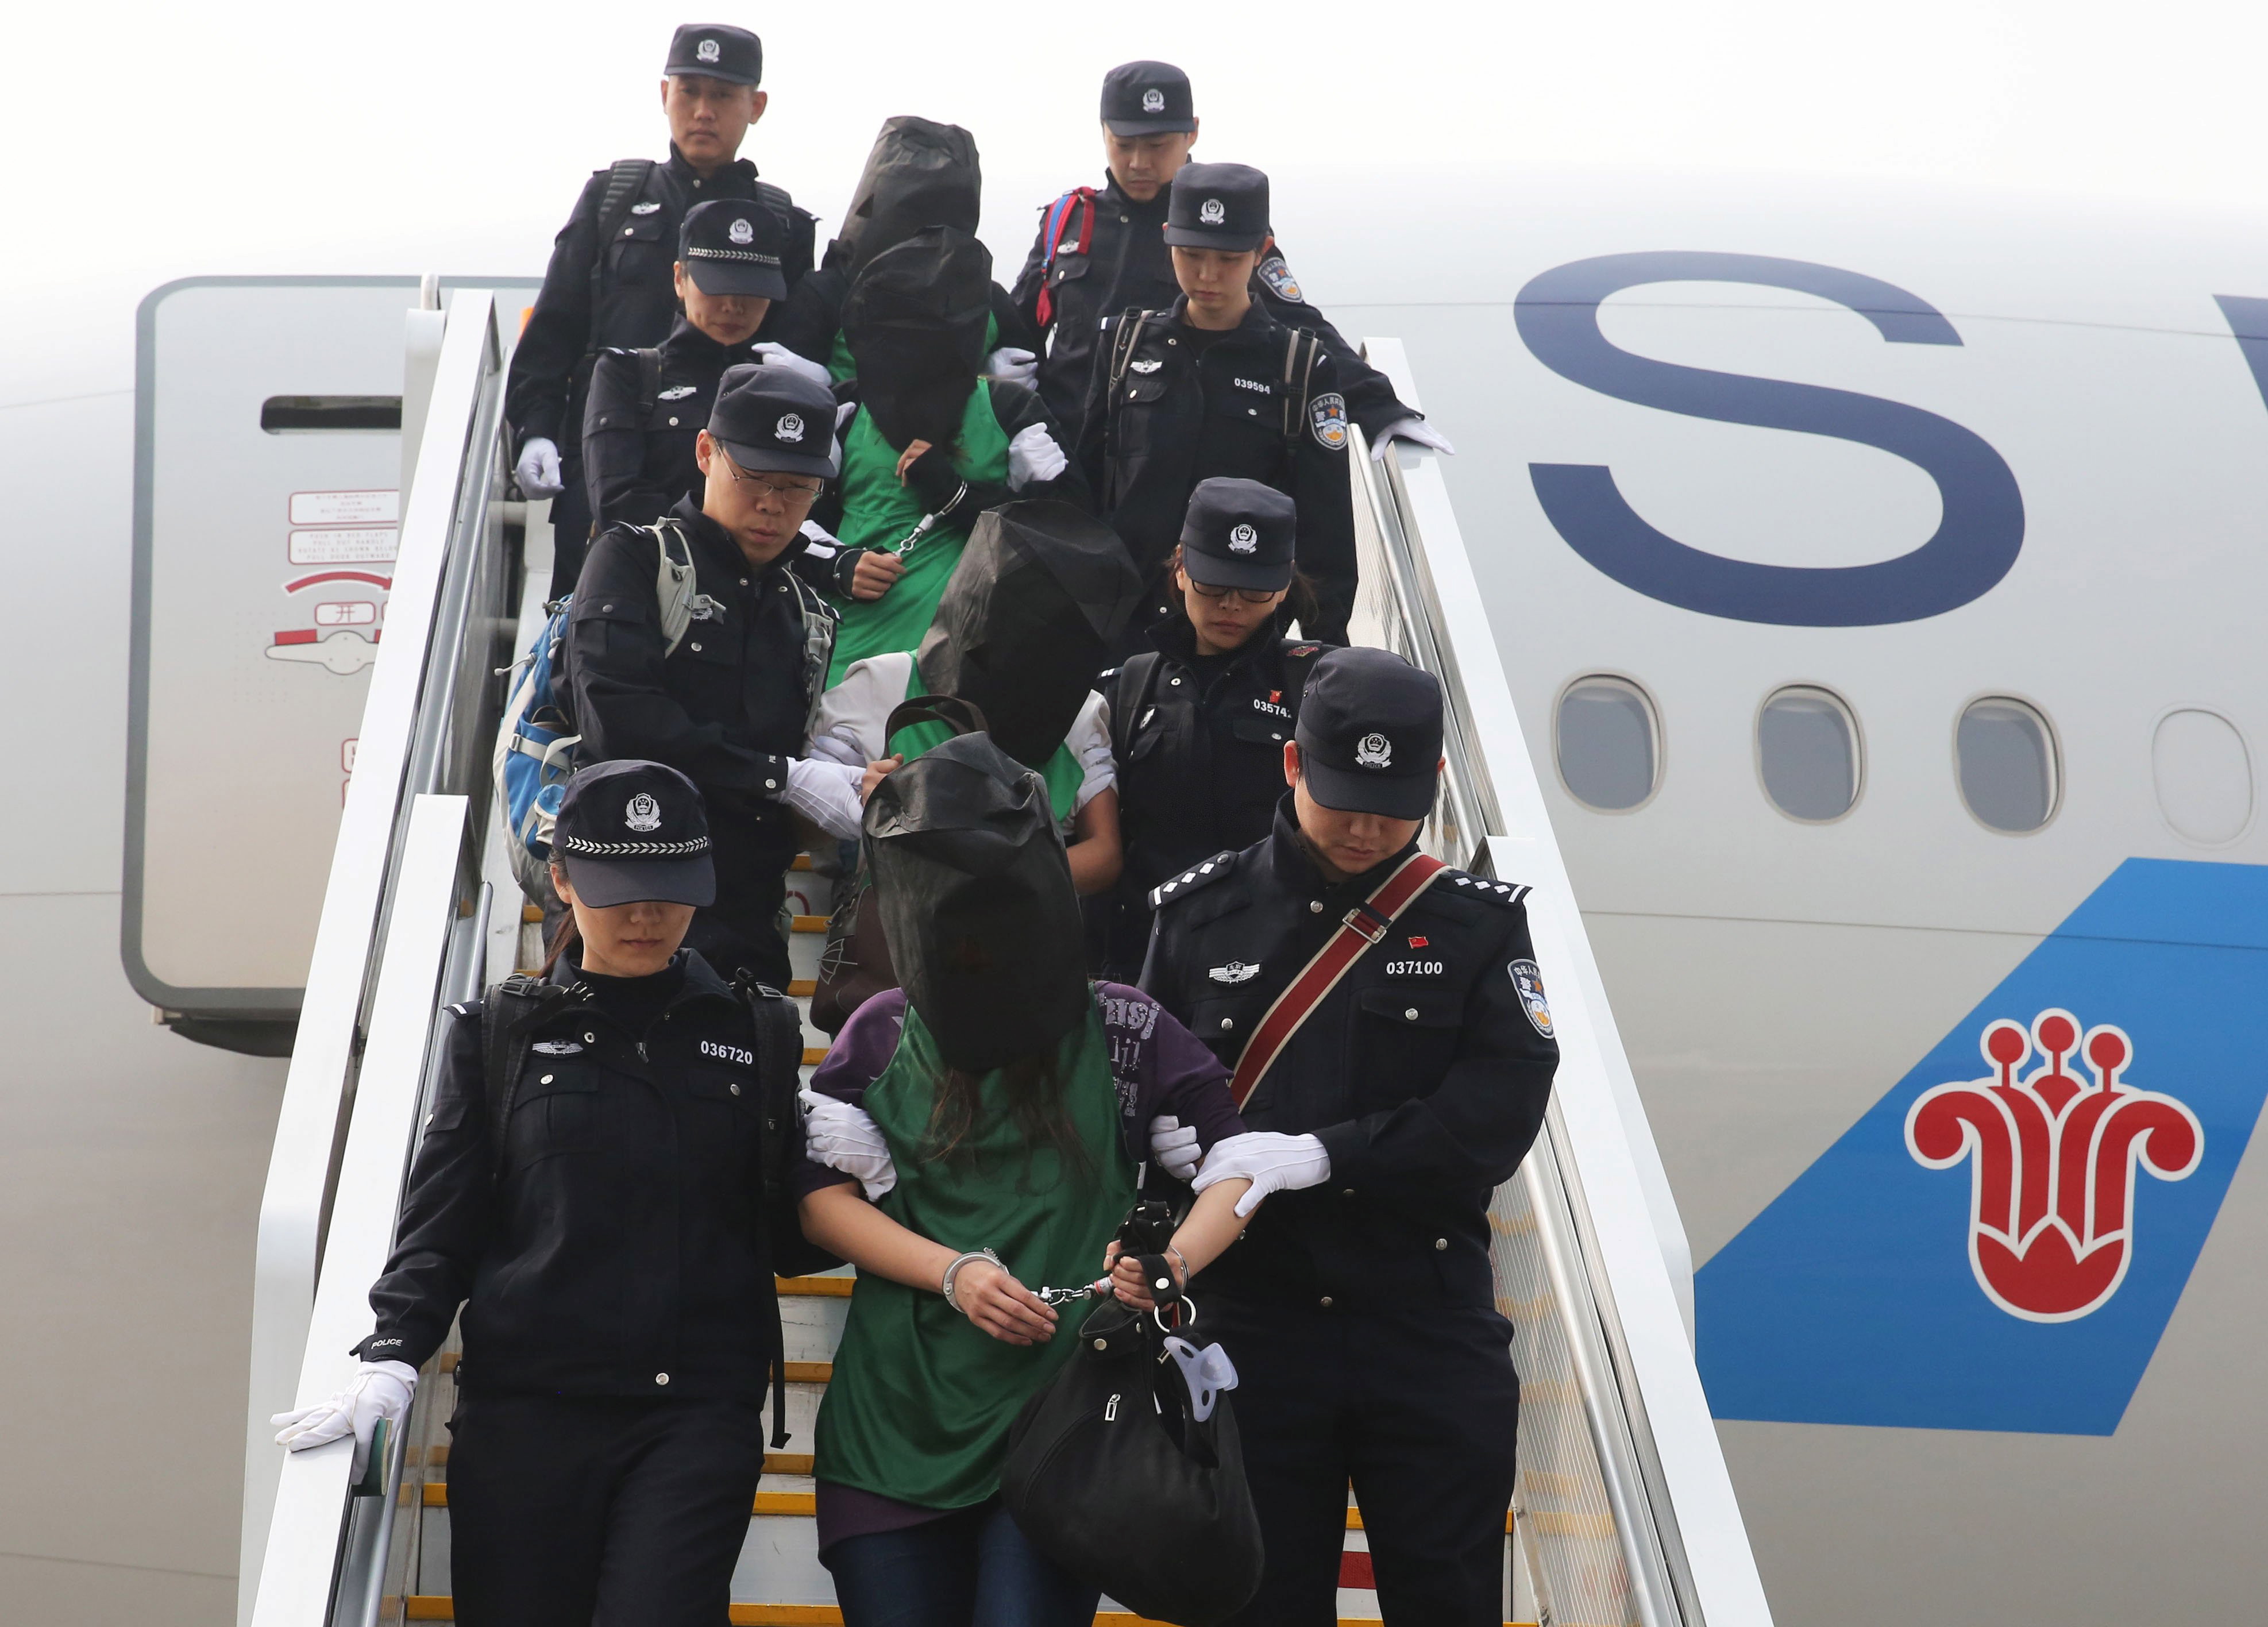 Police escort a group of people wanted for suspected fraud in China, after they were deported from Kenya, as they get off a plane at Beijing Capital International Airport in Beijing on April 13, 2016 (Xinhua/Reuters)